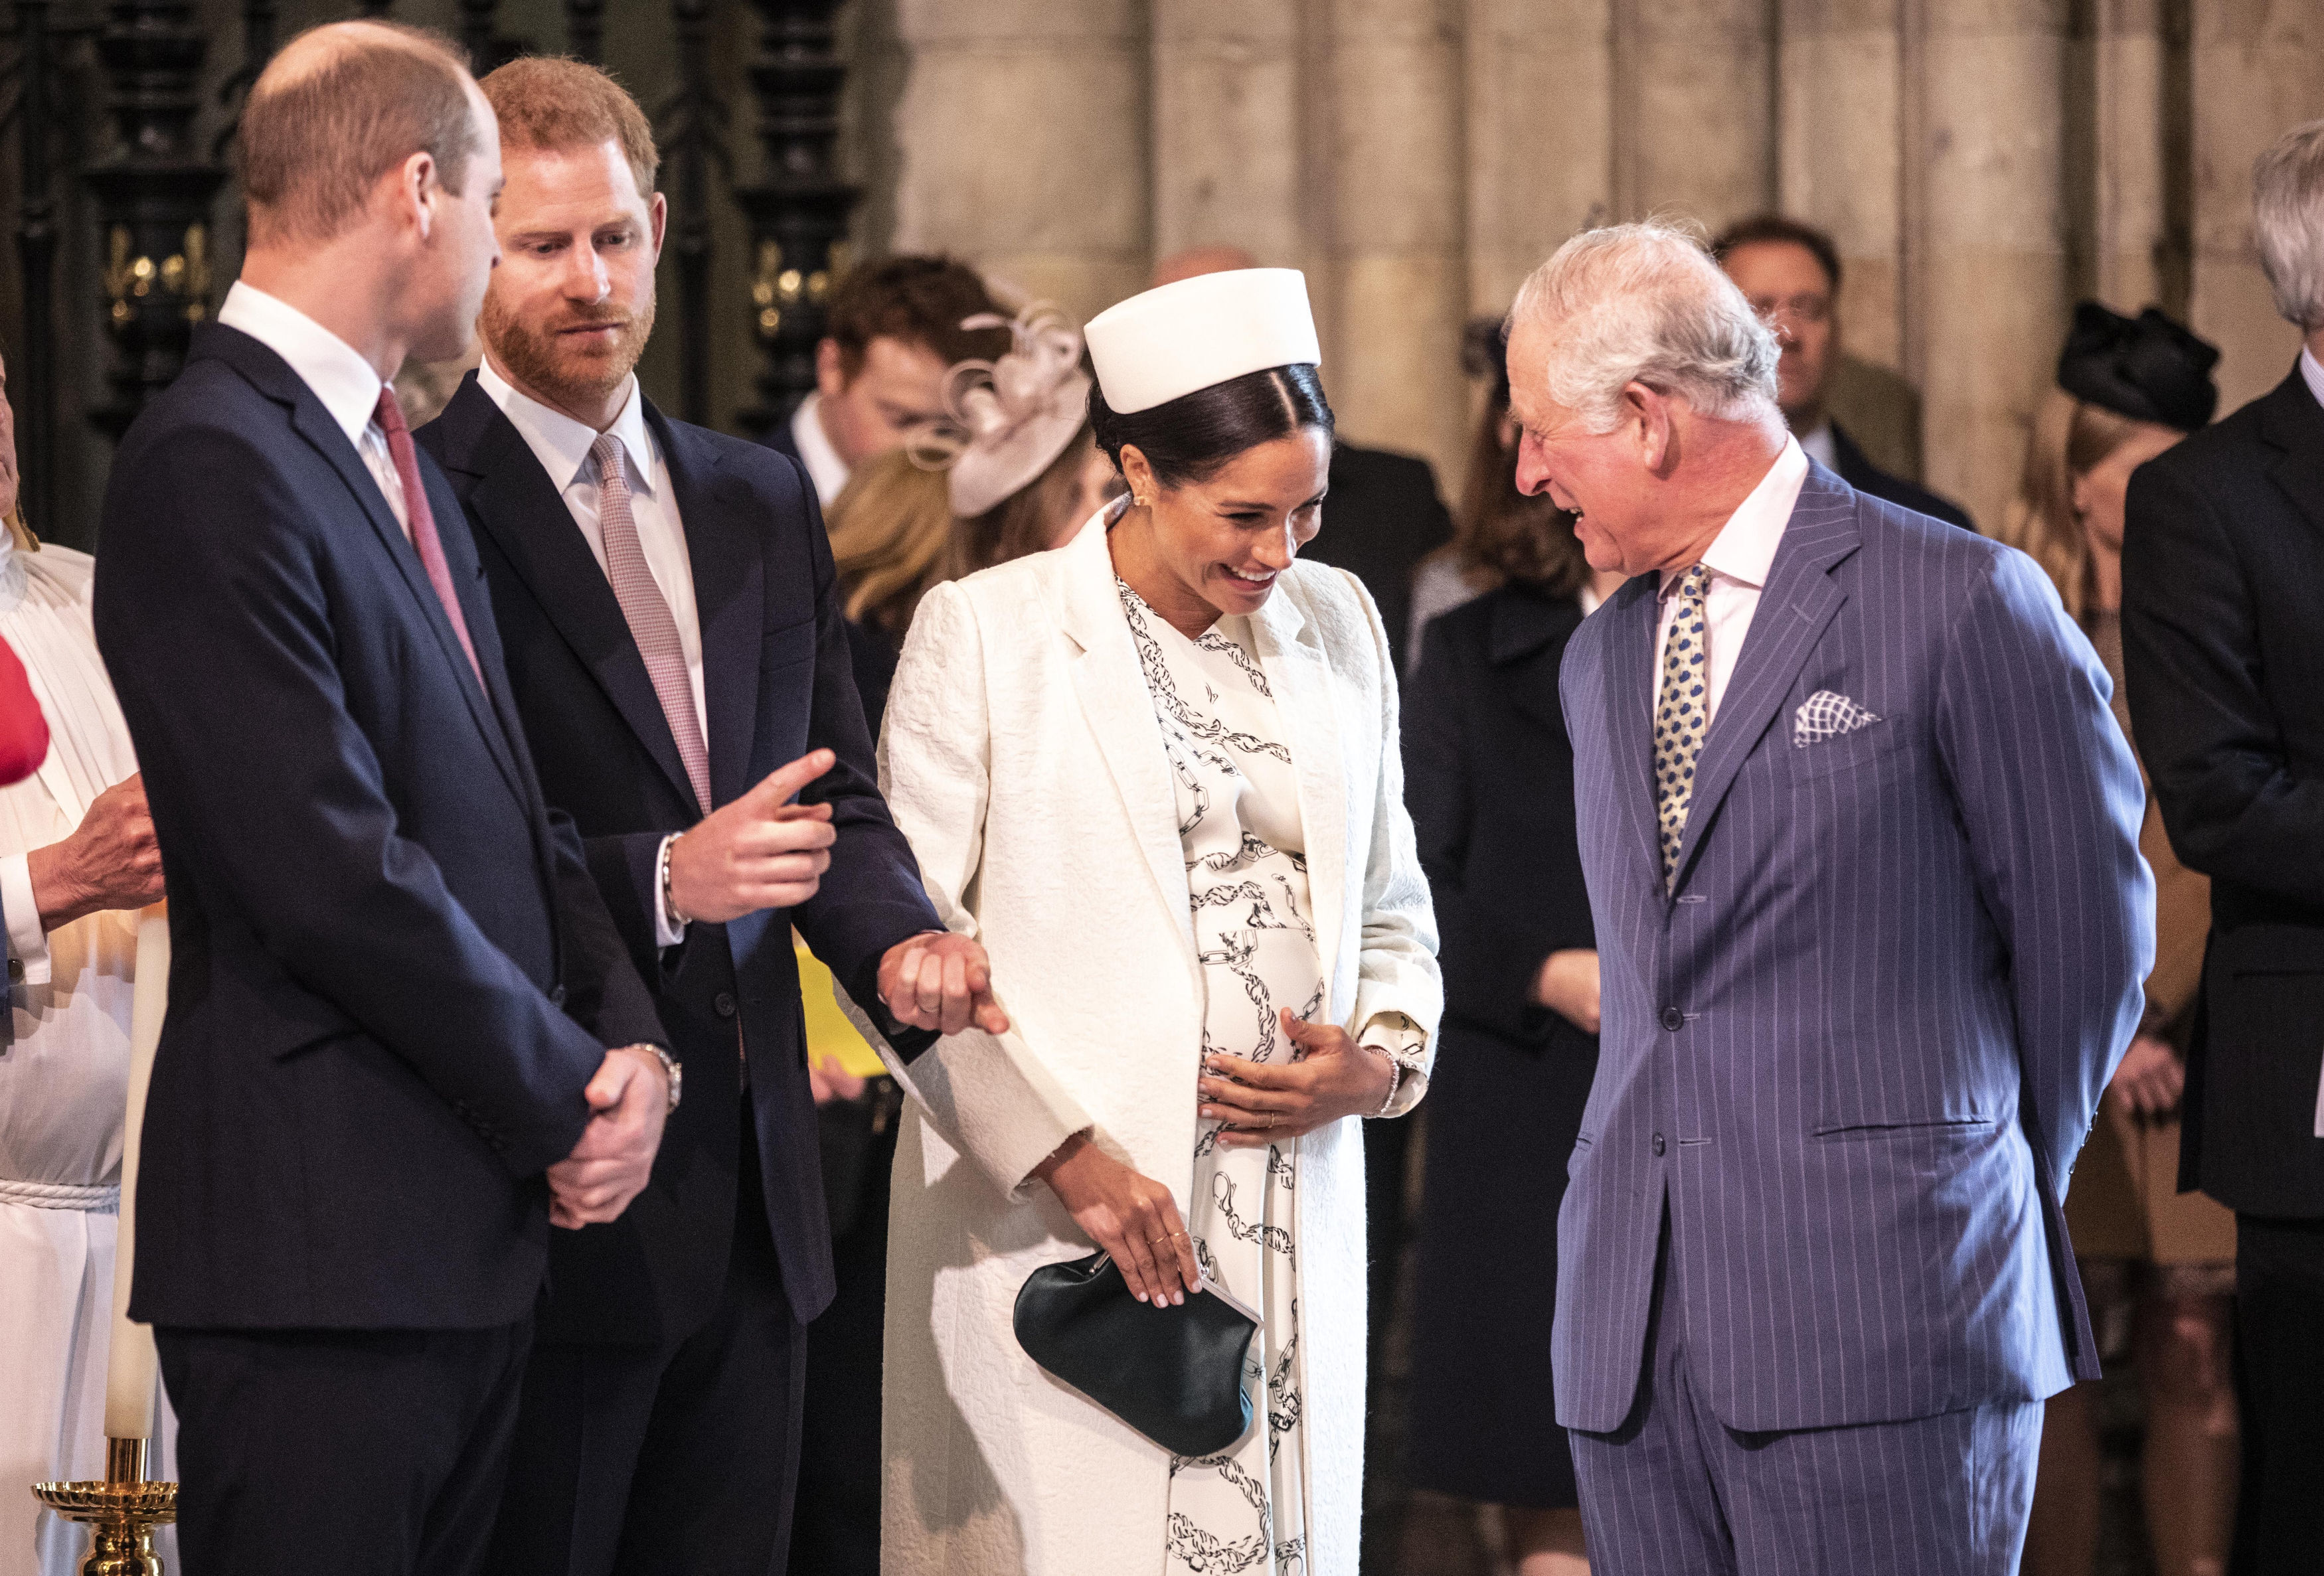 (left to right) The Duke of Cambridge, the Duke of Sussex , the Duchess of Sussex and the Prince of Wales.